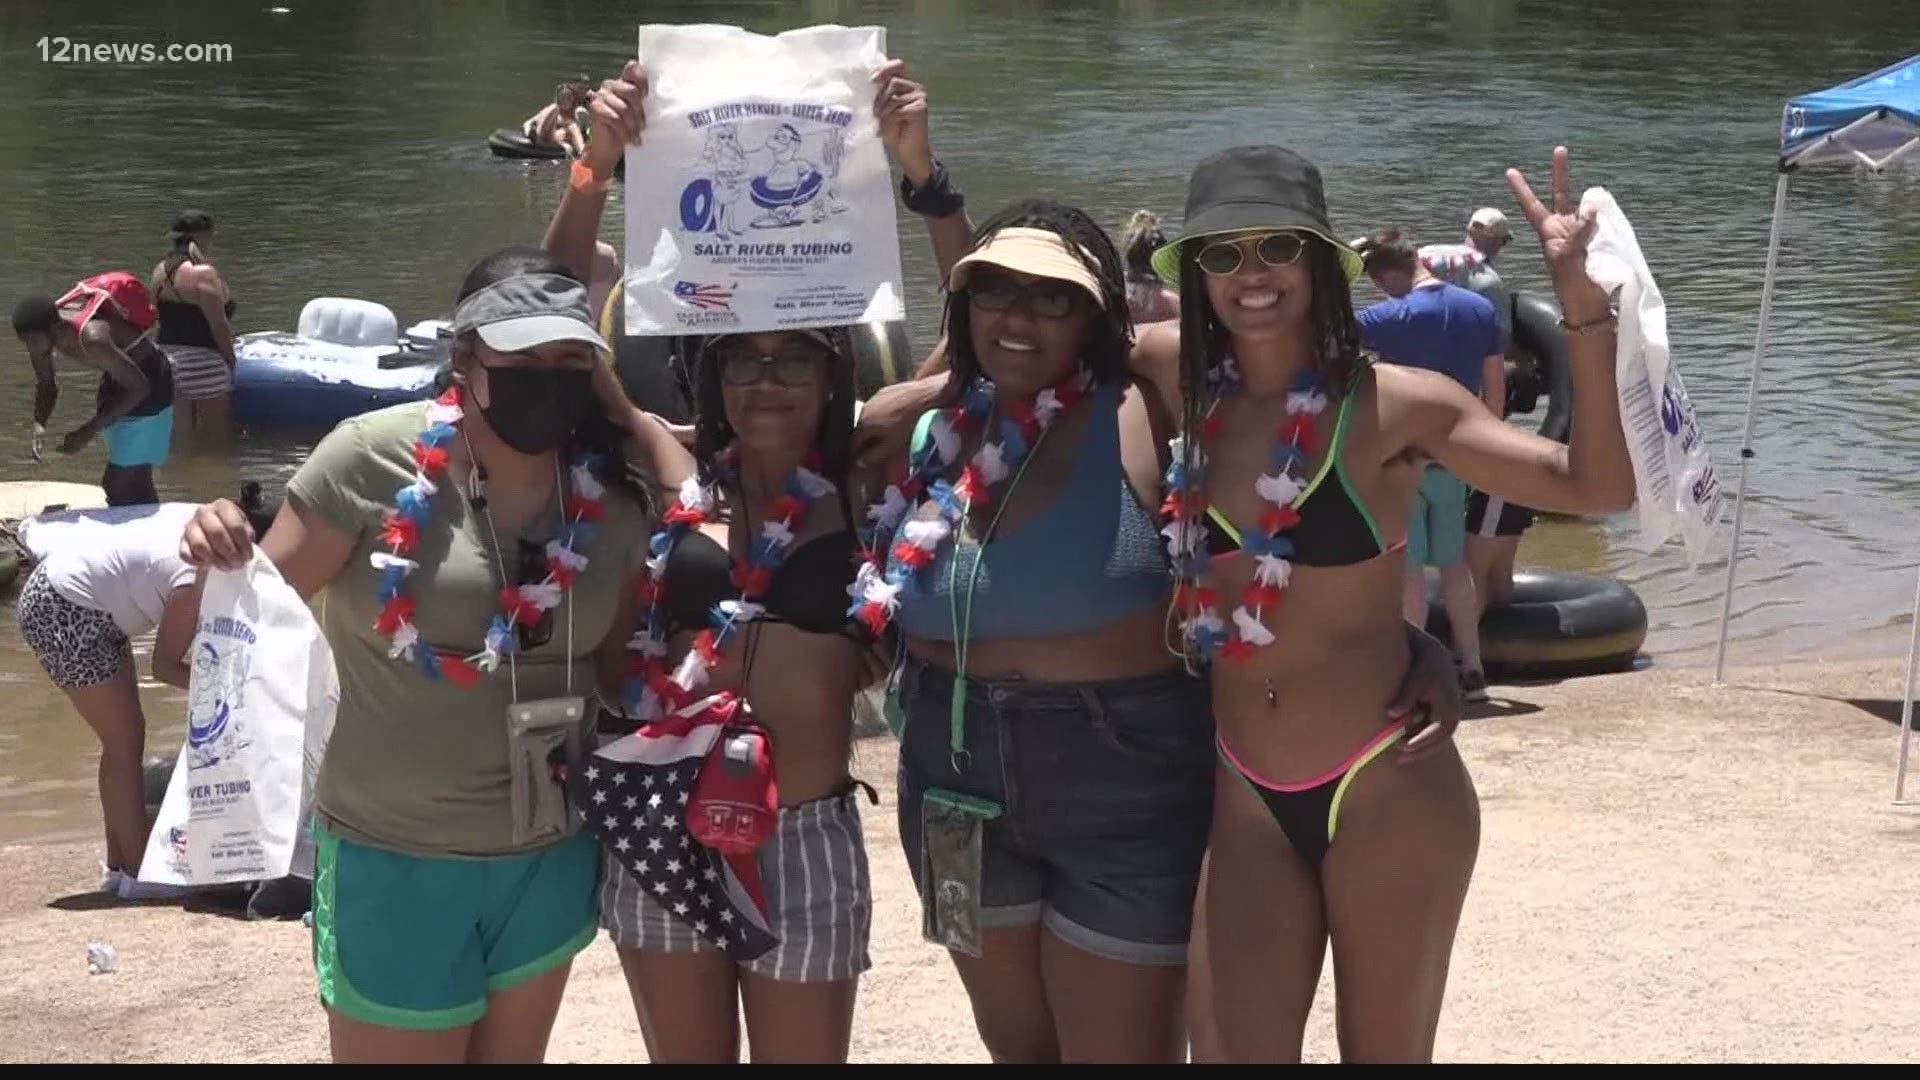 Last year, tubing down the Salt River was shut down. This year, Arizonans are making up for lost time and celebrating Memorial Day relaxing on the water.